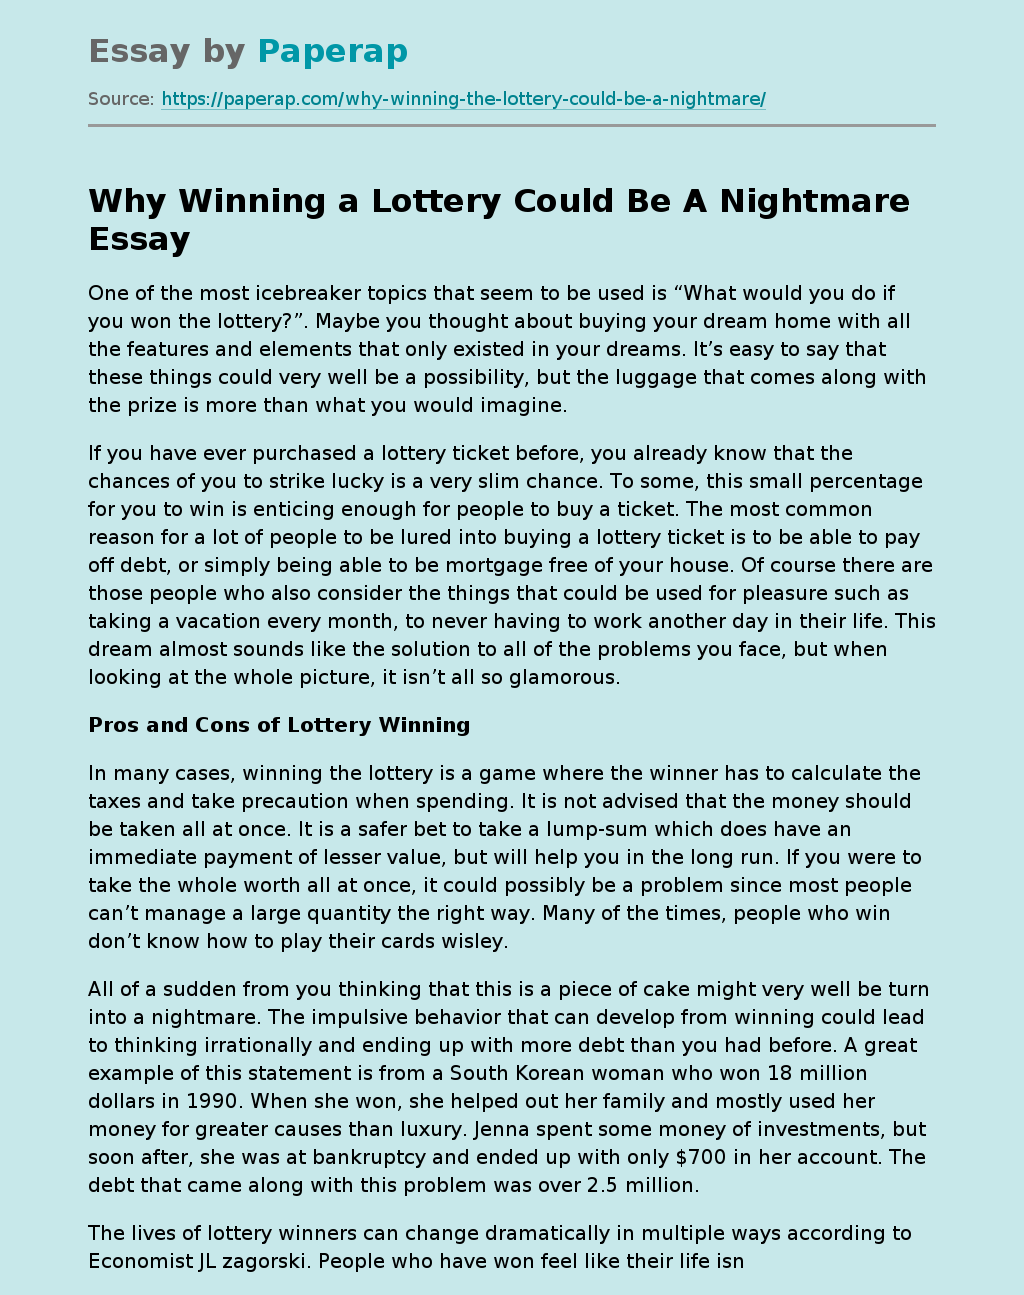 Why Winning a Lottery Could Be A Nightmare